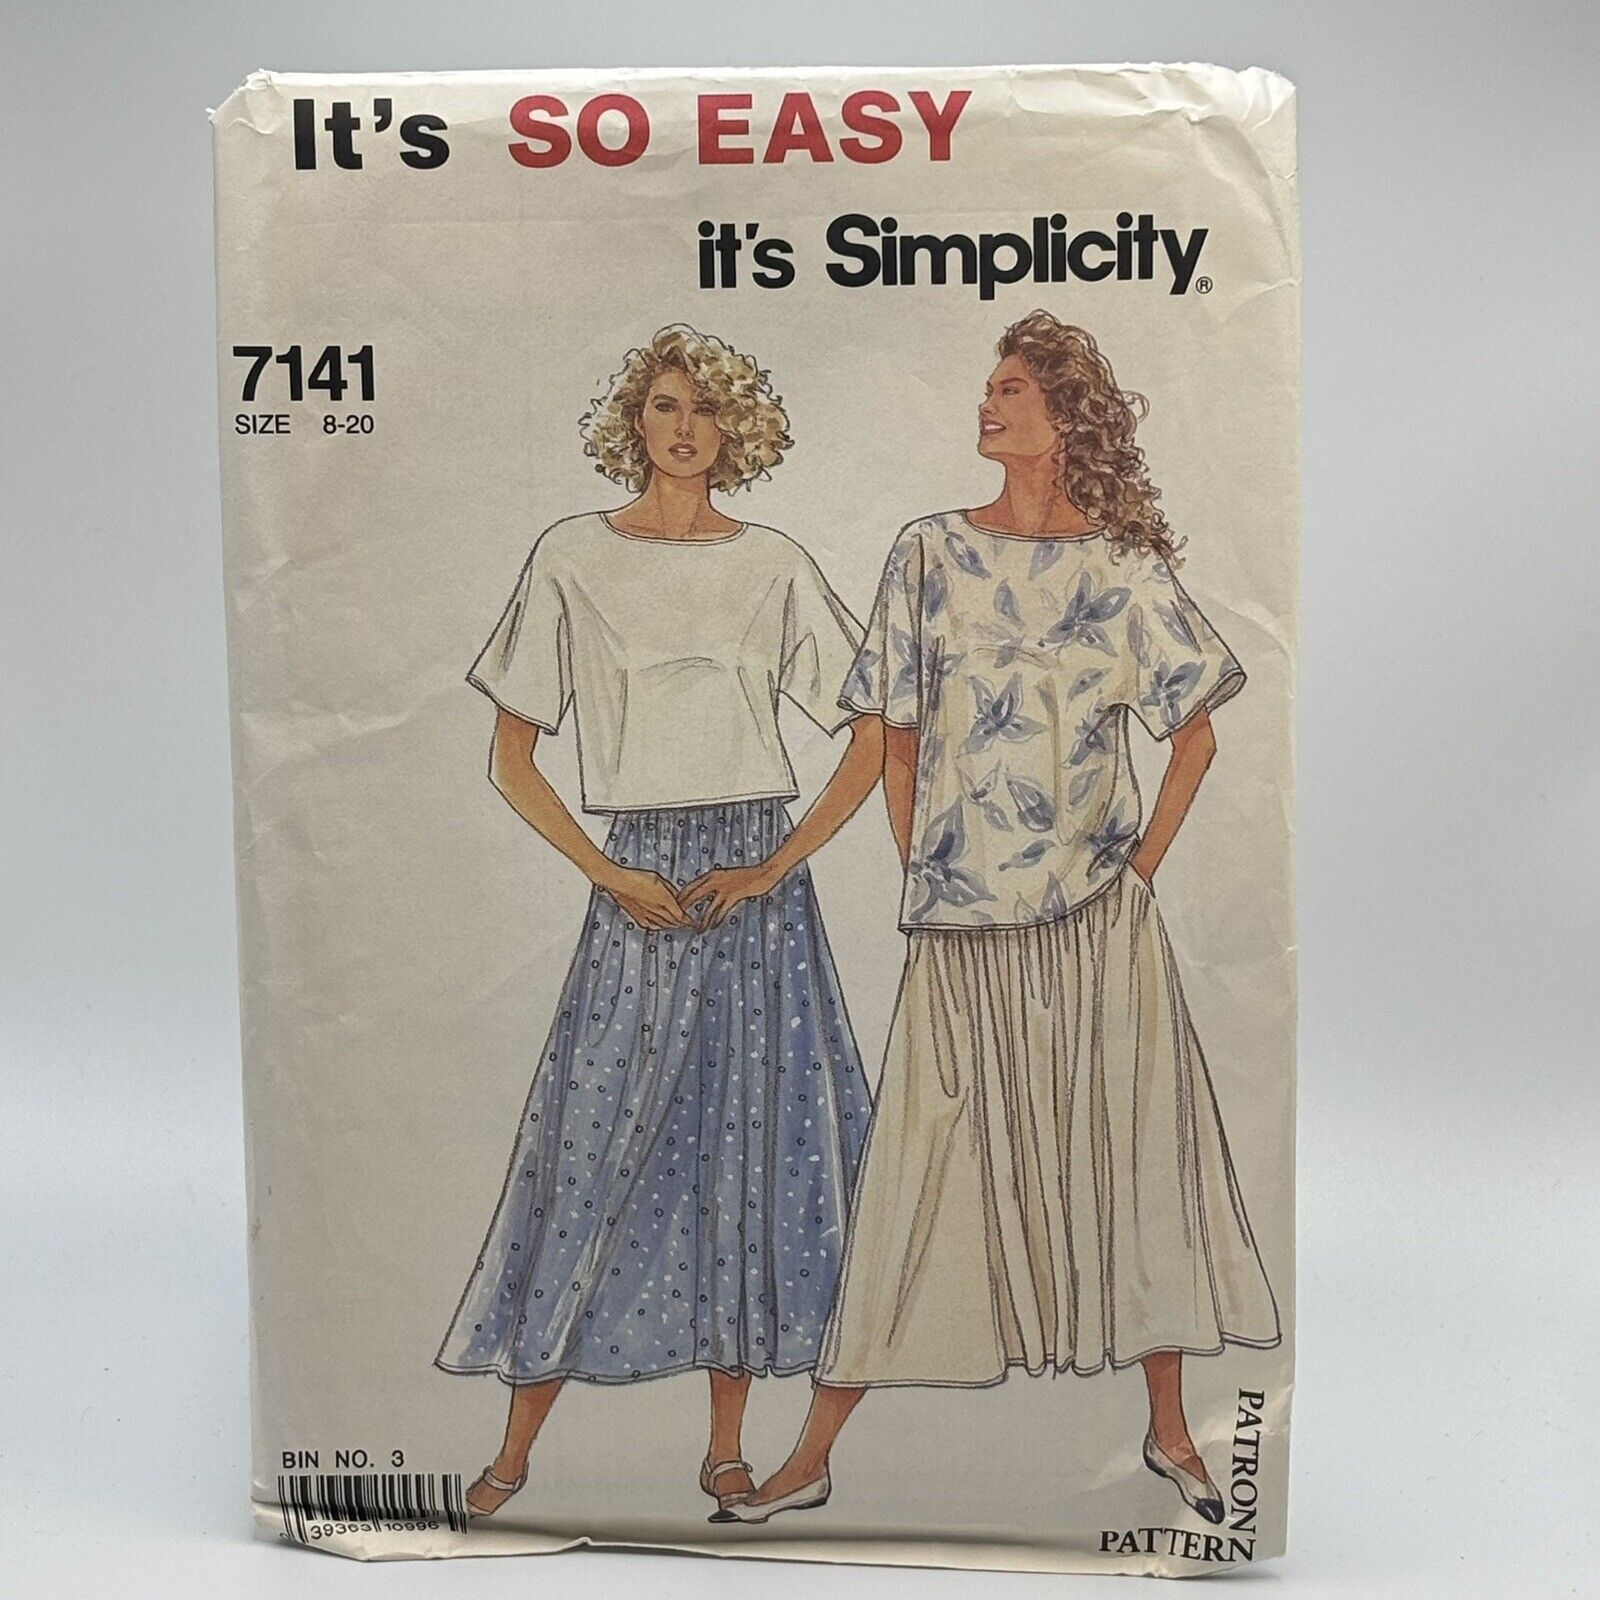 Simplicity Pattern 7141 So Easy Misses 8-20 Pullover Top Skirt Uncut